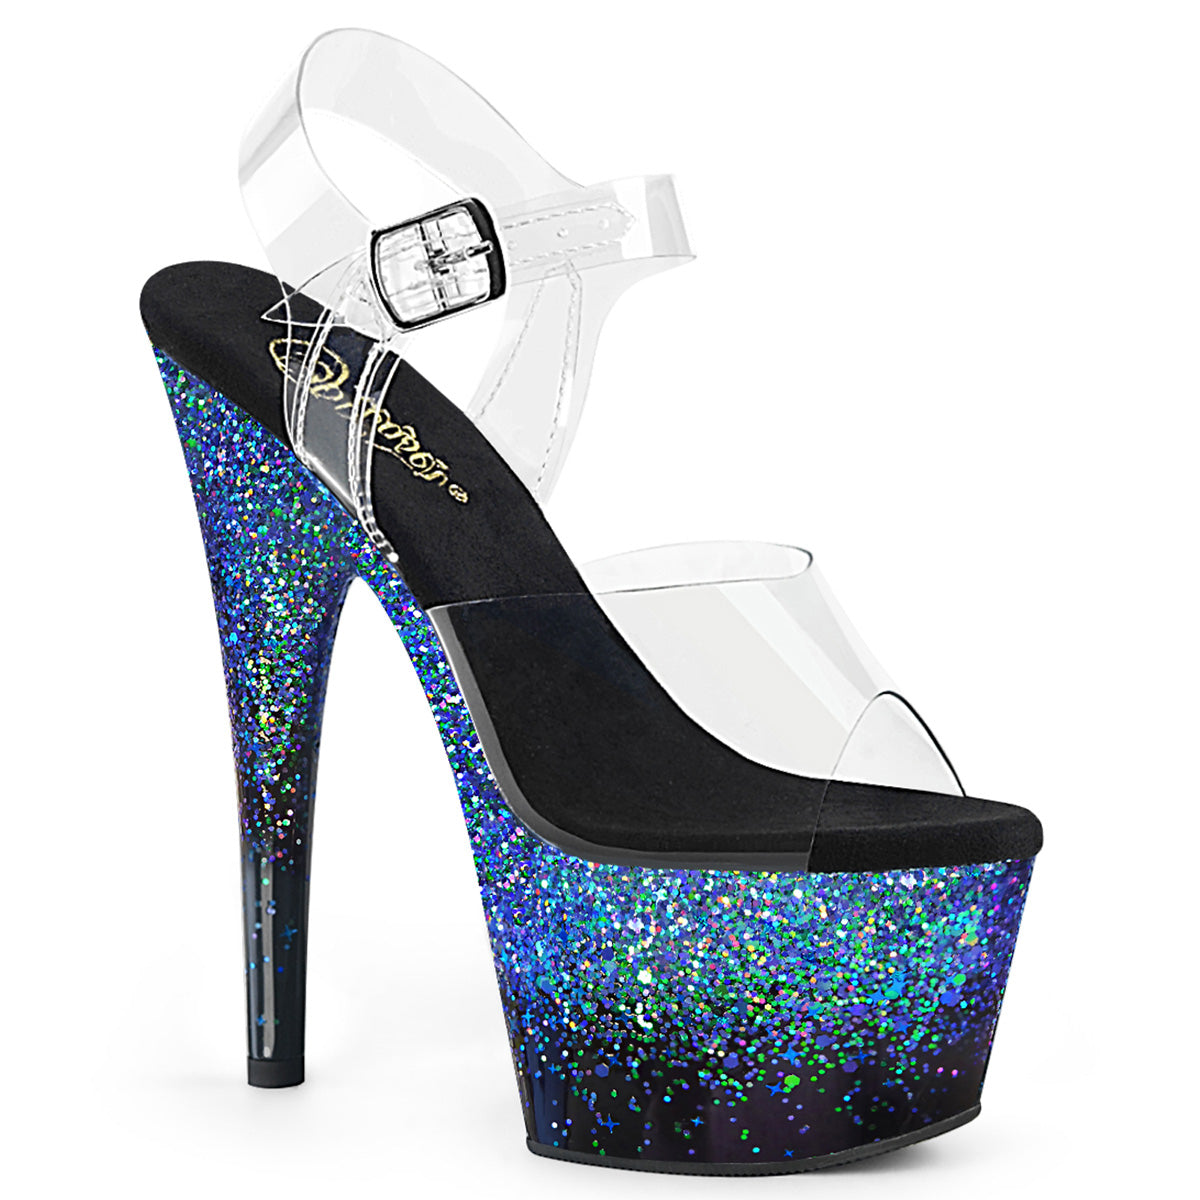 Pleaser ADORE-708SS Clear-Black-Blue Multi Glitter 7 Inch (178mm) Heel, 2 3/4 Inch (70mm) Platform Ankle Strap Sandal With Holographic Gradient Effect on the Platform Bottom